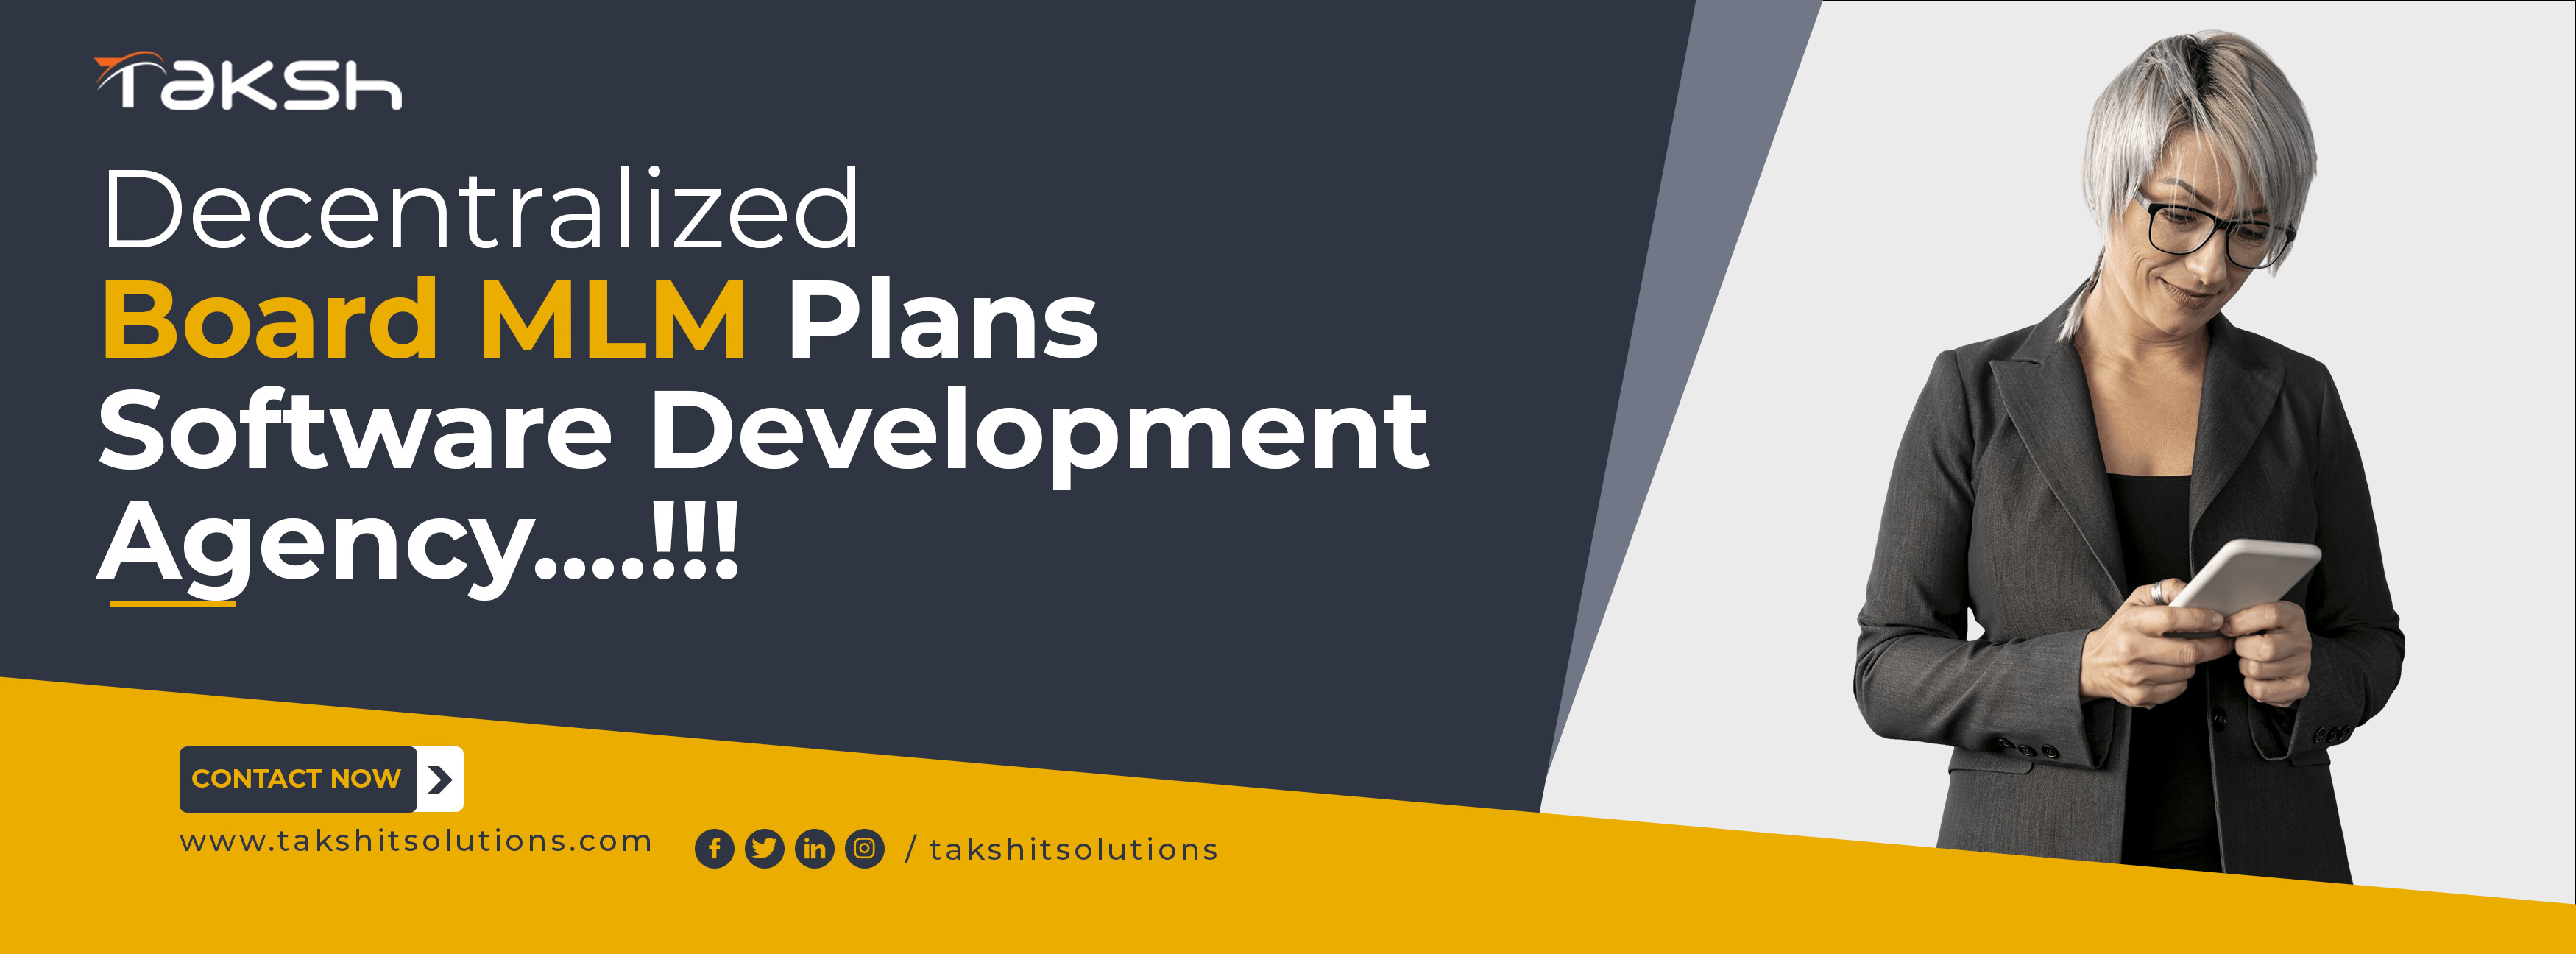 Decentralized Board MLM Plan Software Development Agency || Taksh IT Solutions Private Limited